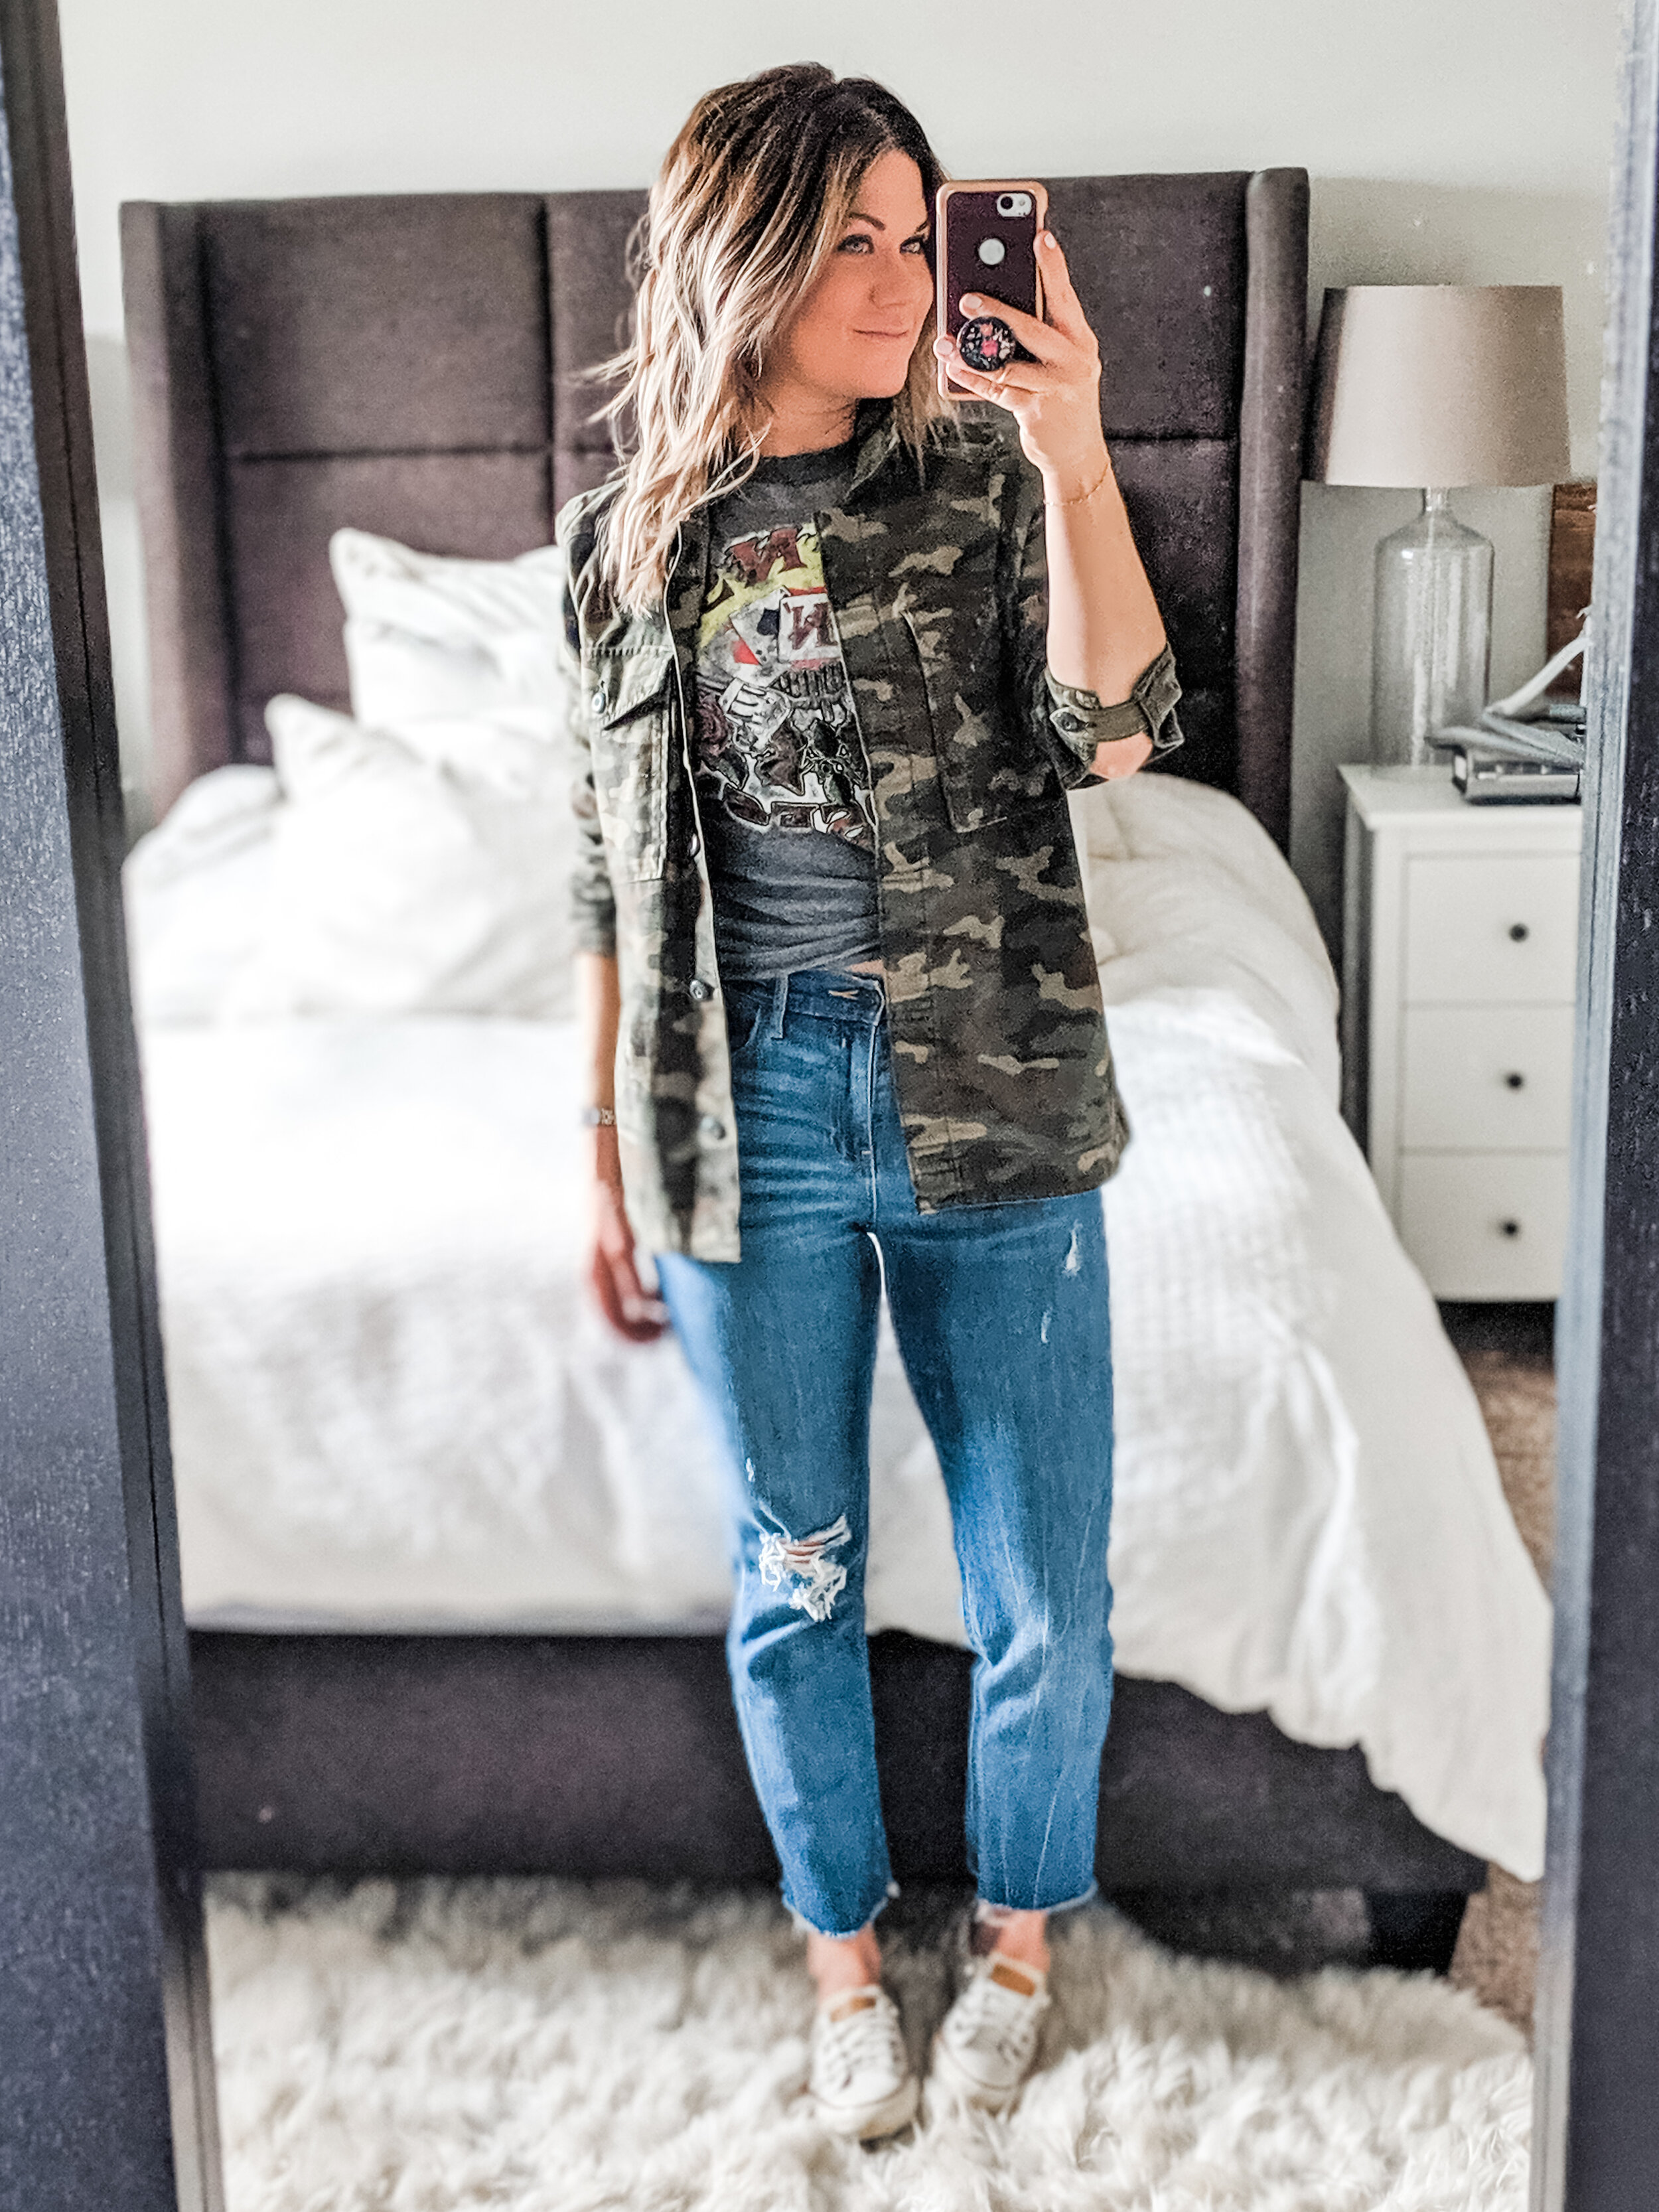  Graphic Tees will forever be a staple in my closet. I actually don't love Guns N' Roses but I do adore their tee paired with this coat. The jeans are Old Navy's High-Waisted AKA the Power Jean (size down when purchasing- they stretch A LOT and are s